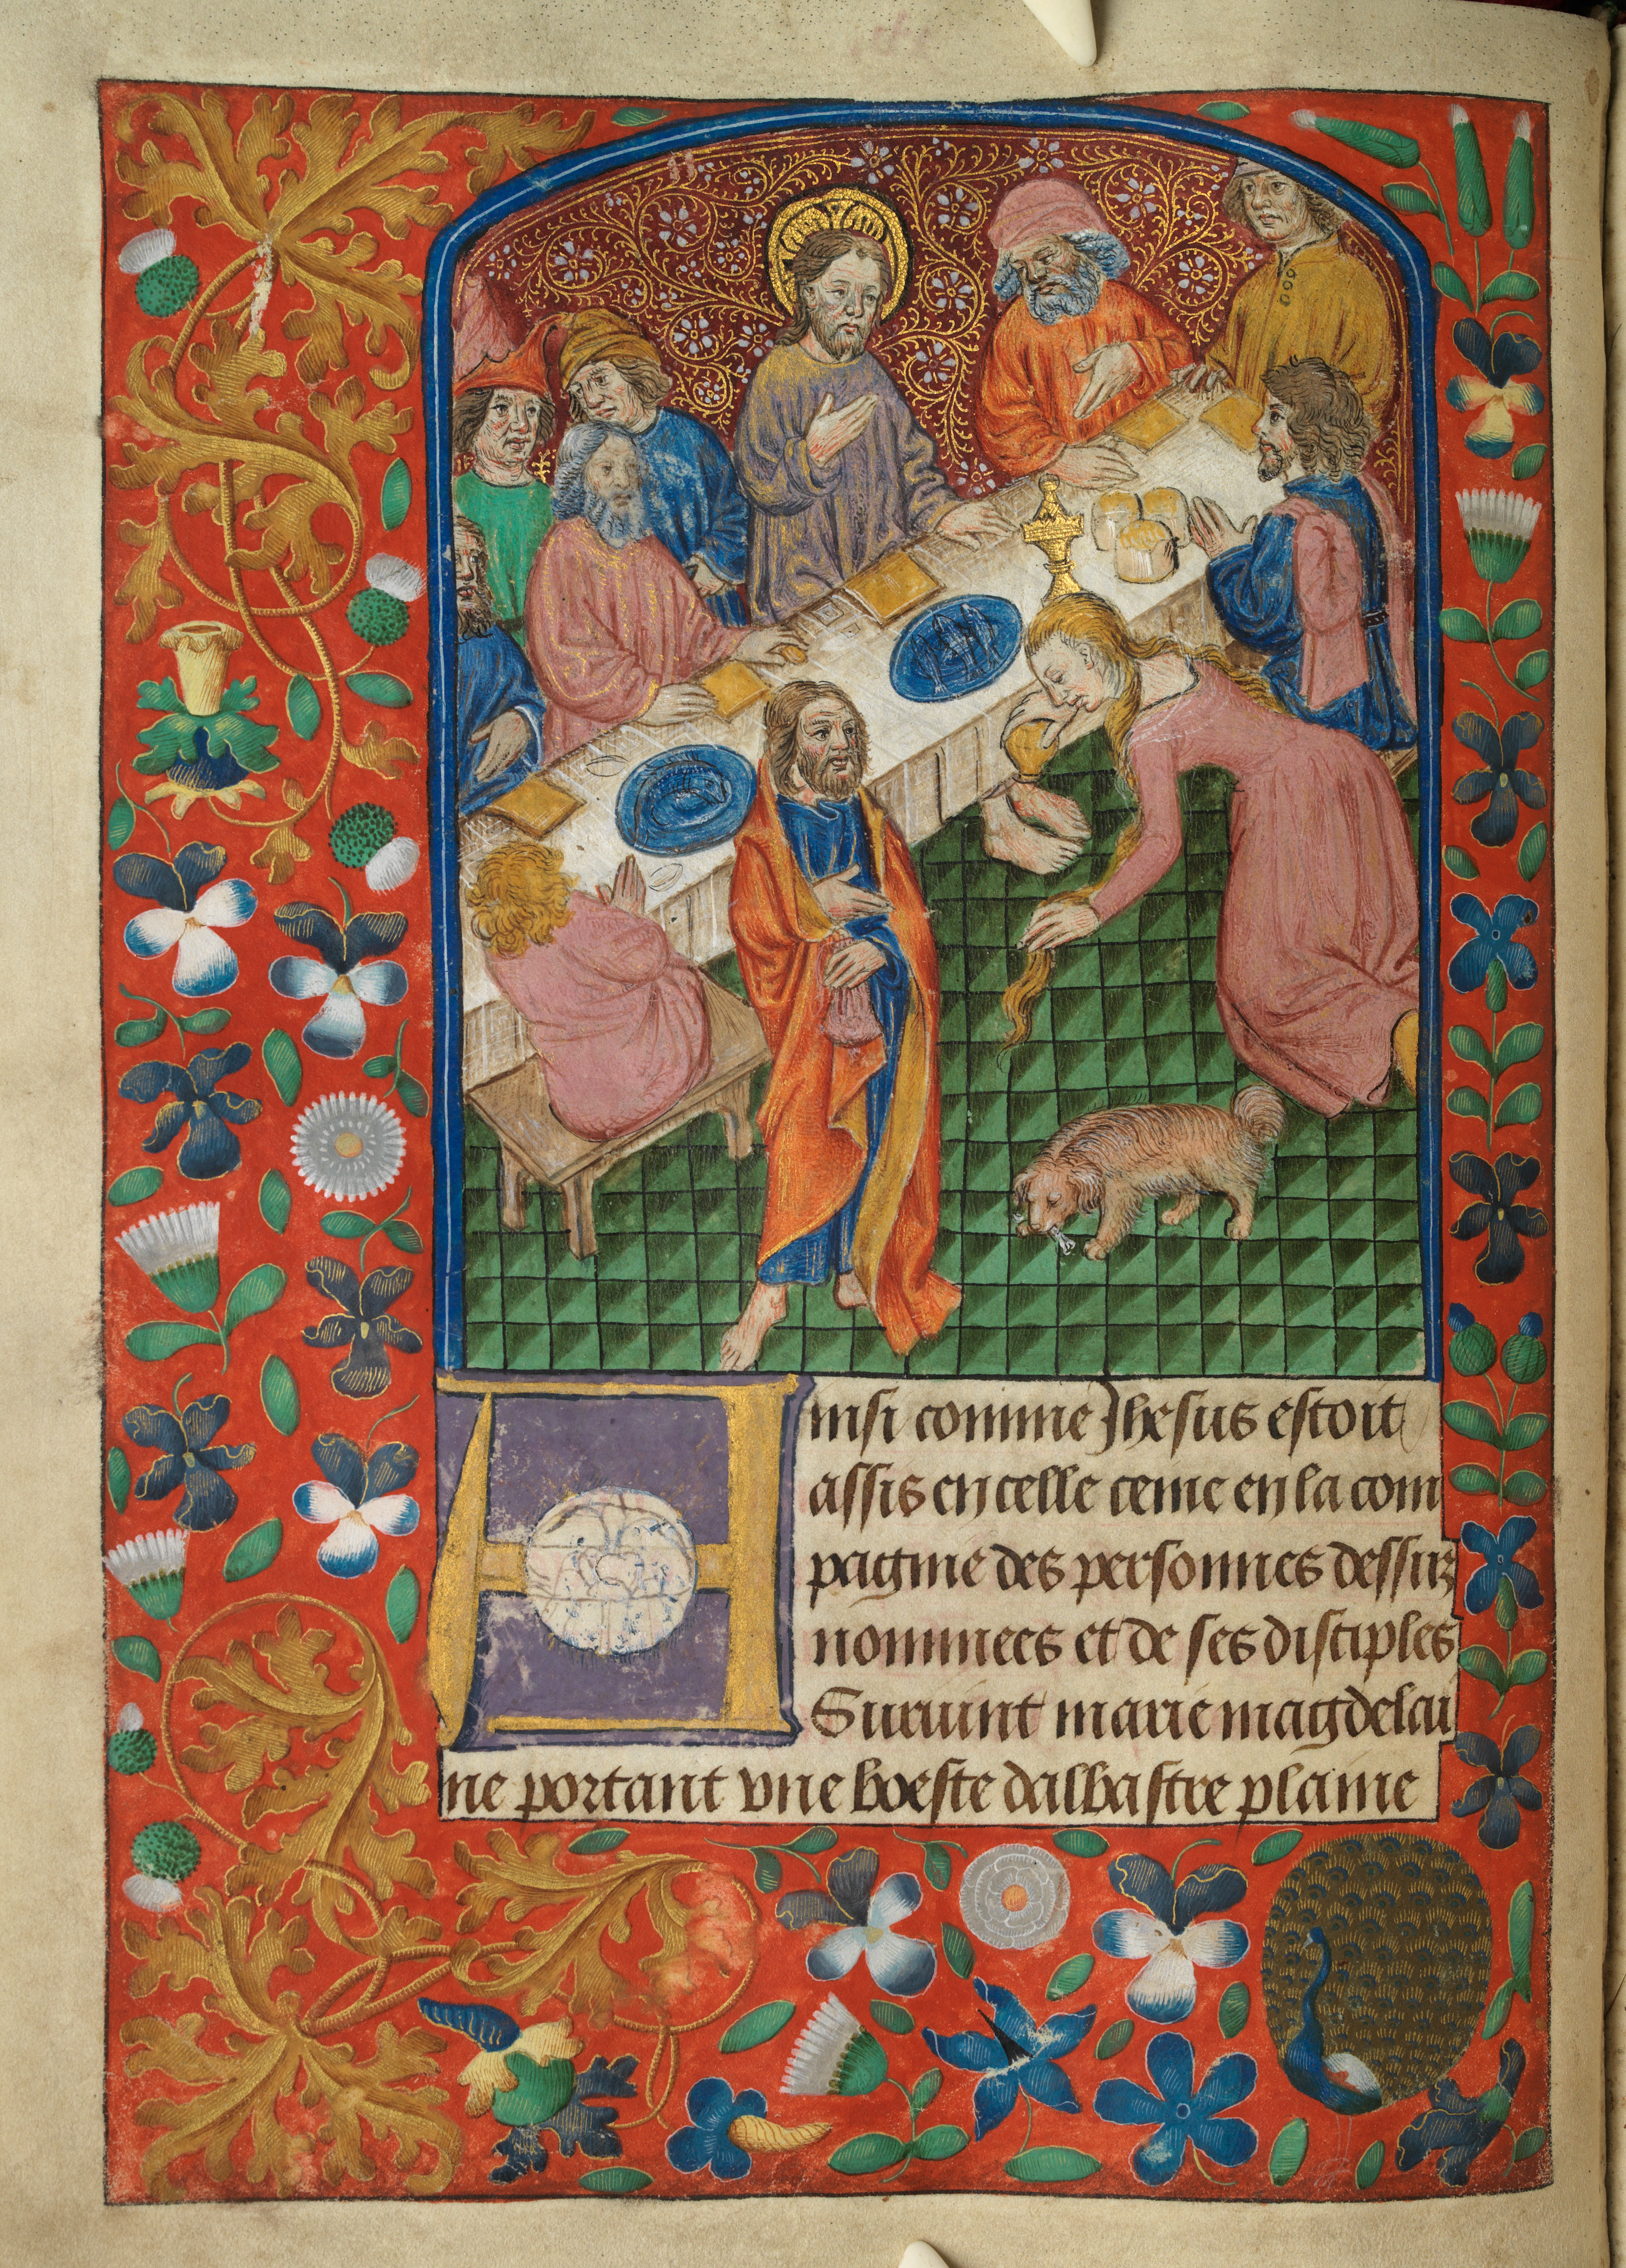 Mary Magdalen anointing Christ’s feet (f. 15v)